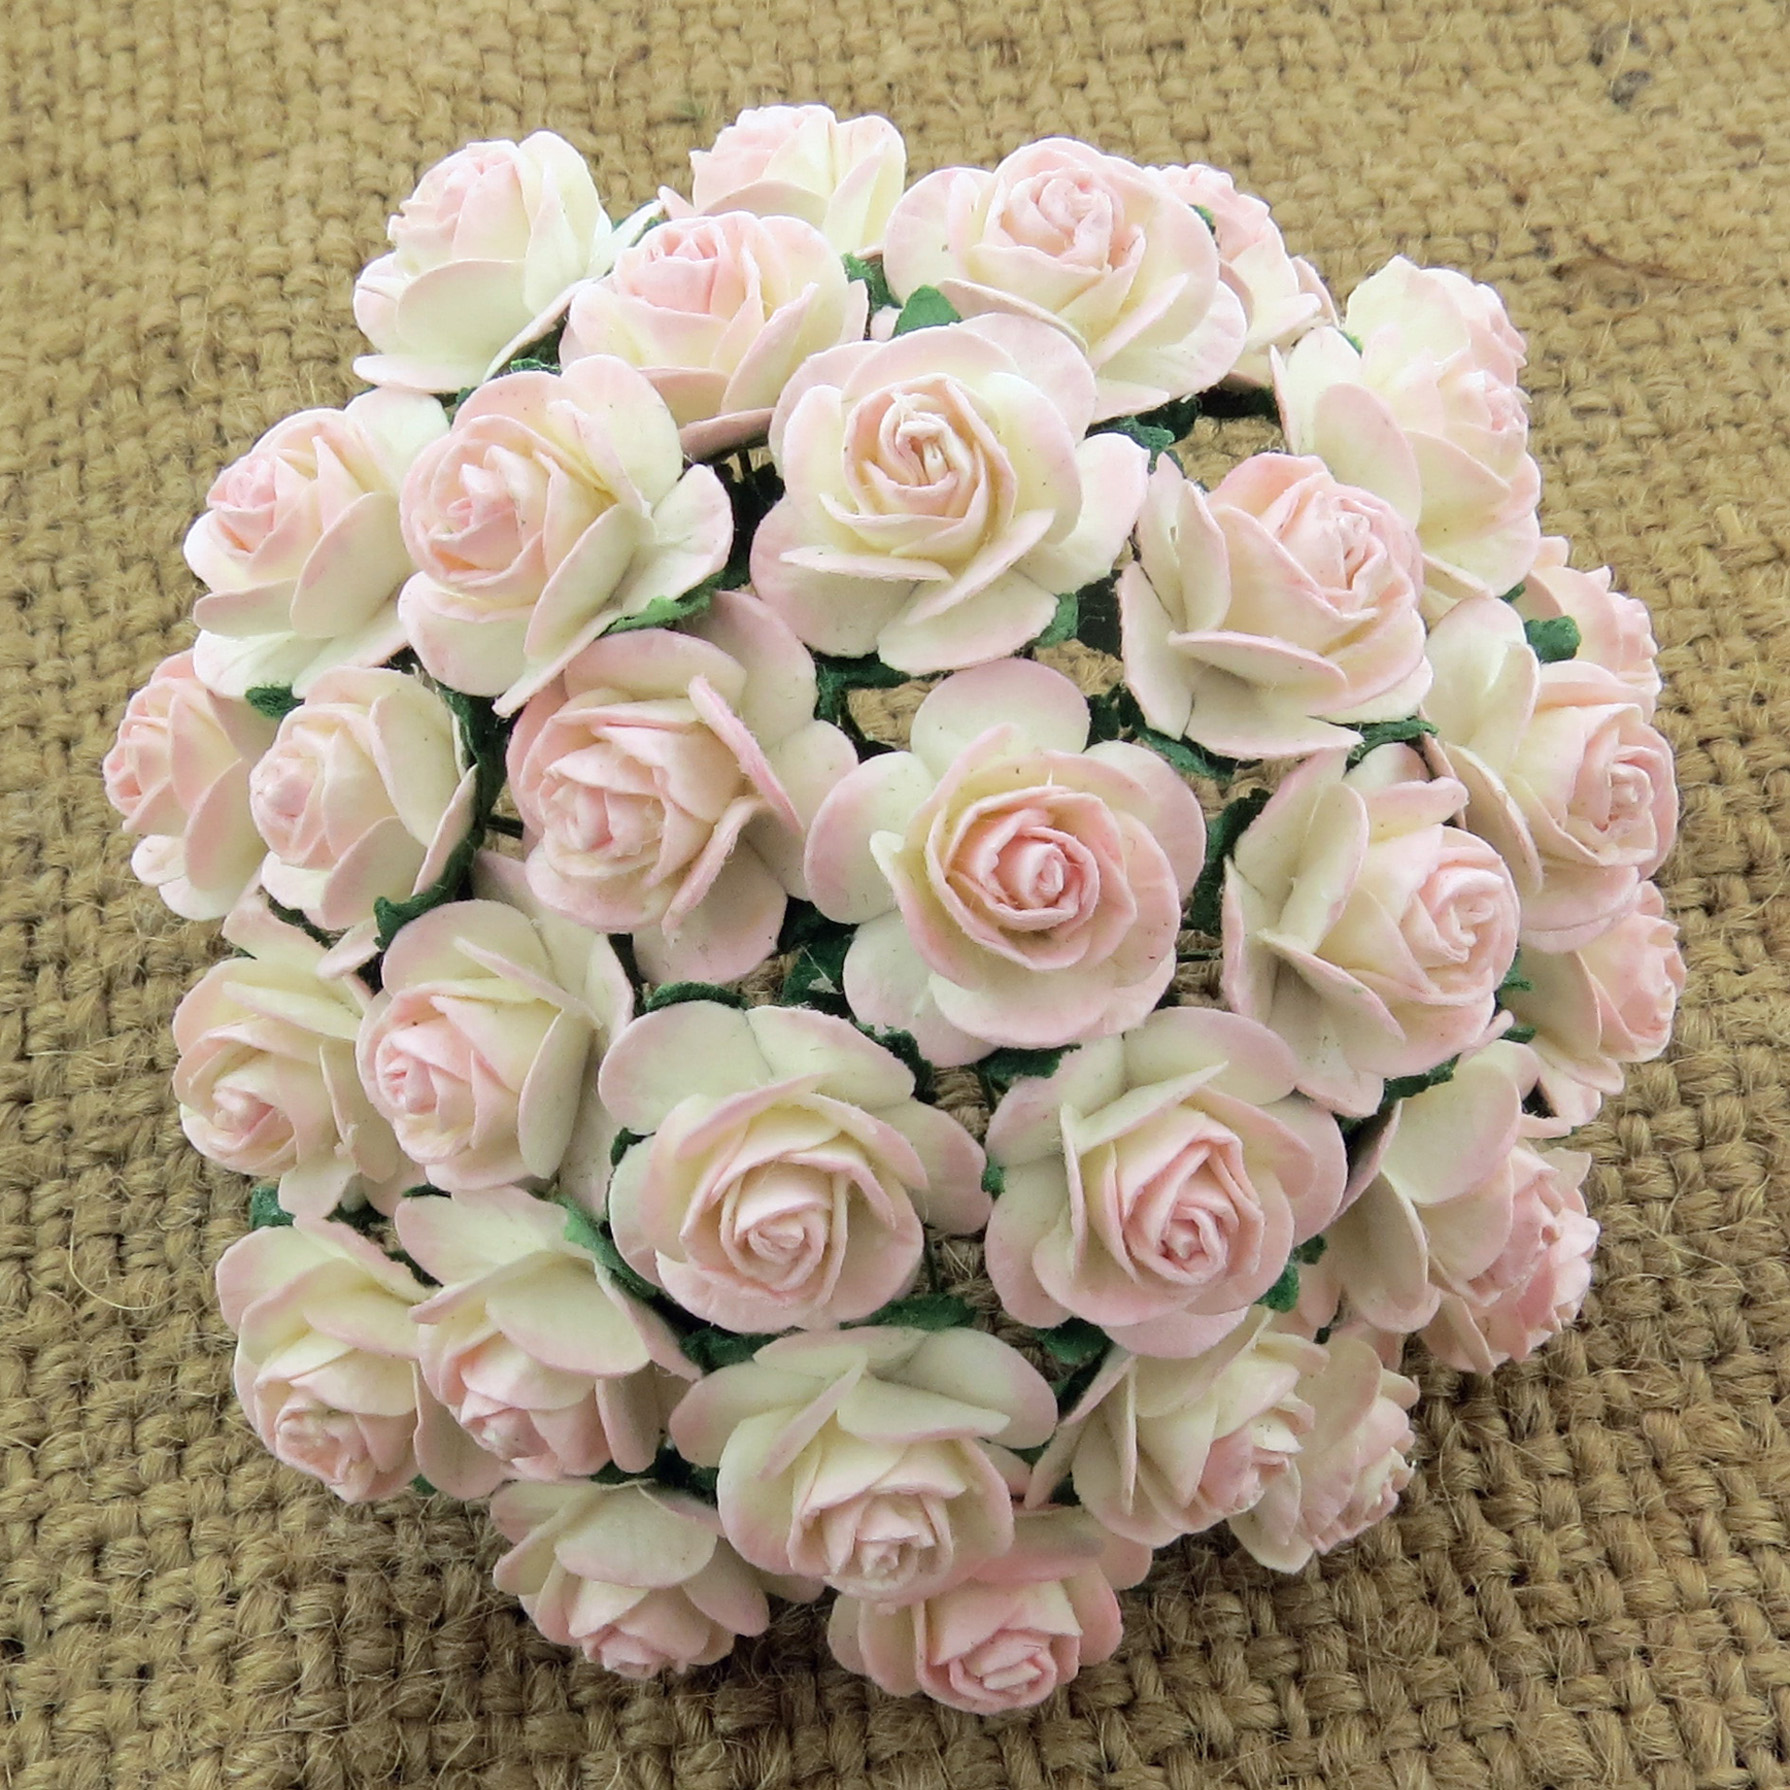 100 2-TONE IVORY/PALE PINK MULBERRY PAPER OPEN ROSES